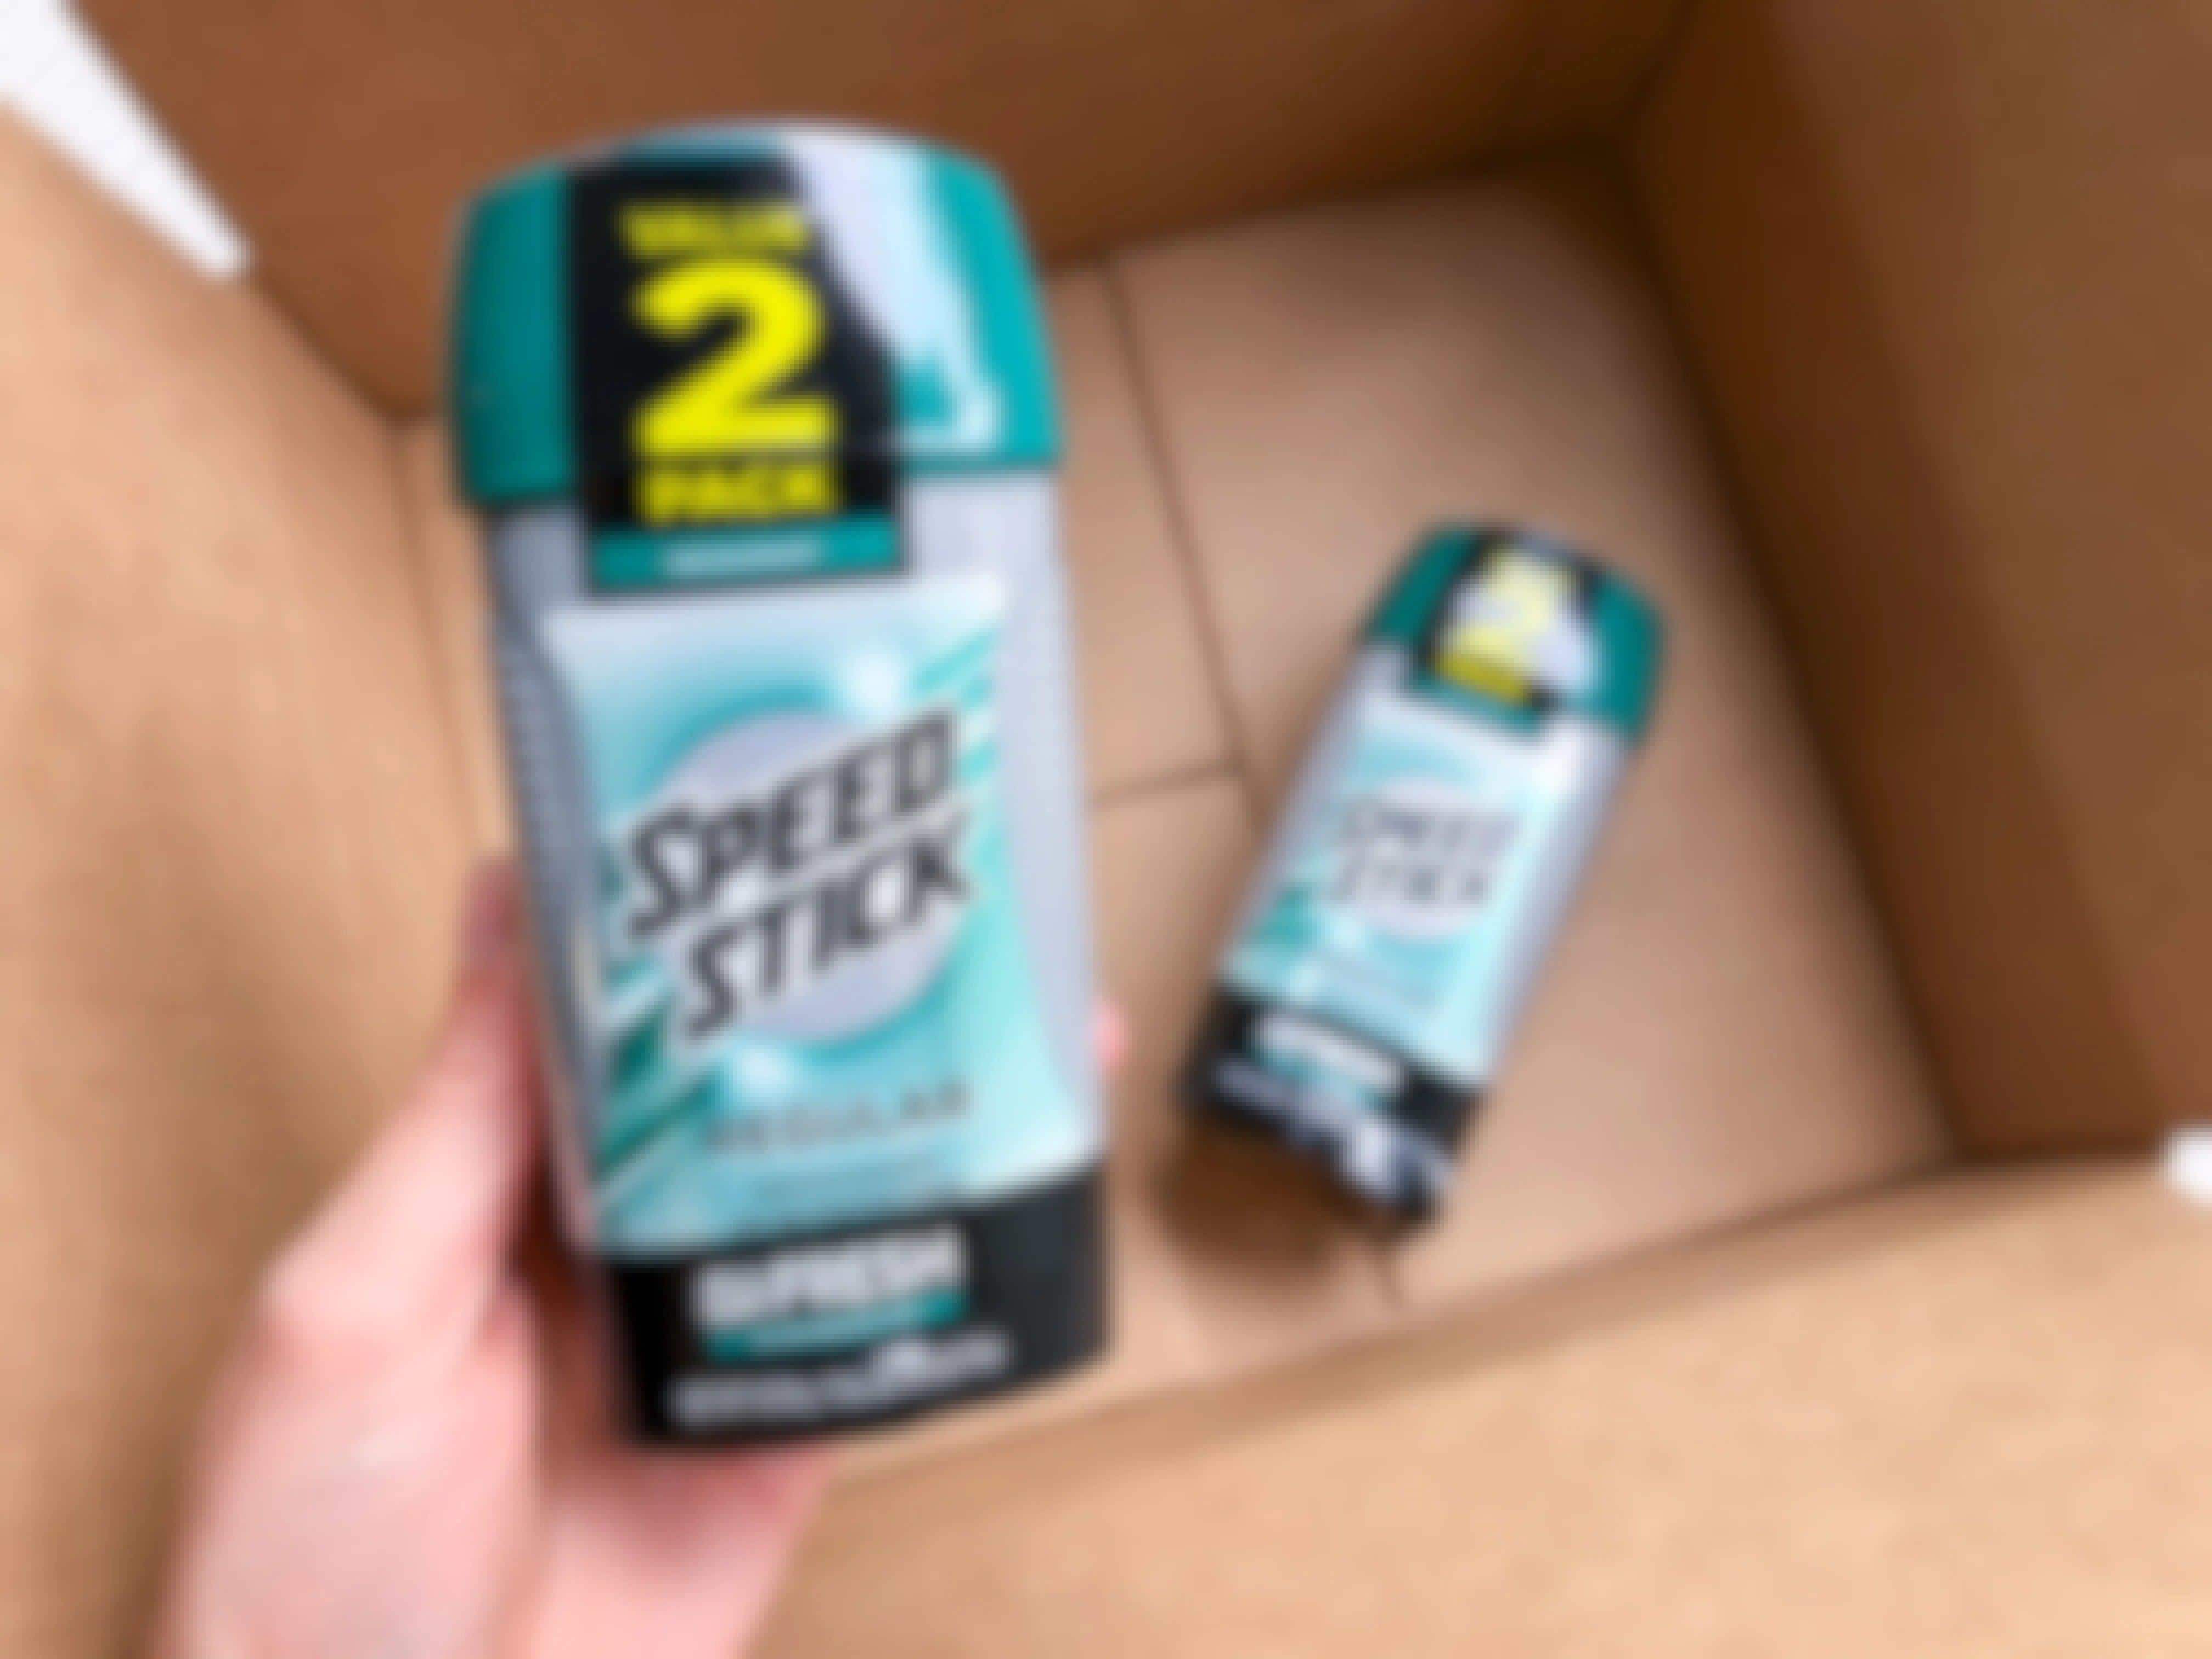 A hand holding Speed Stick deodrant over a delivery box.